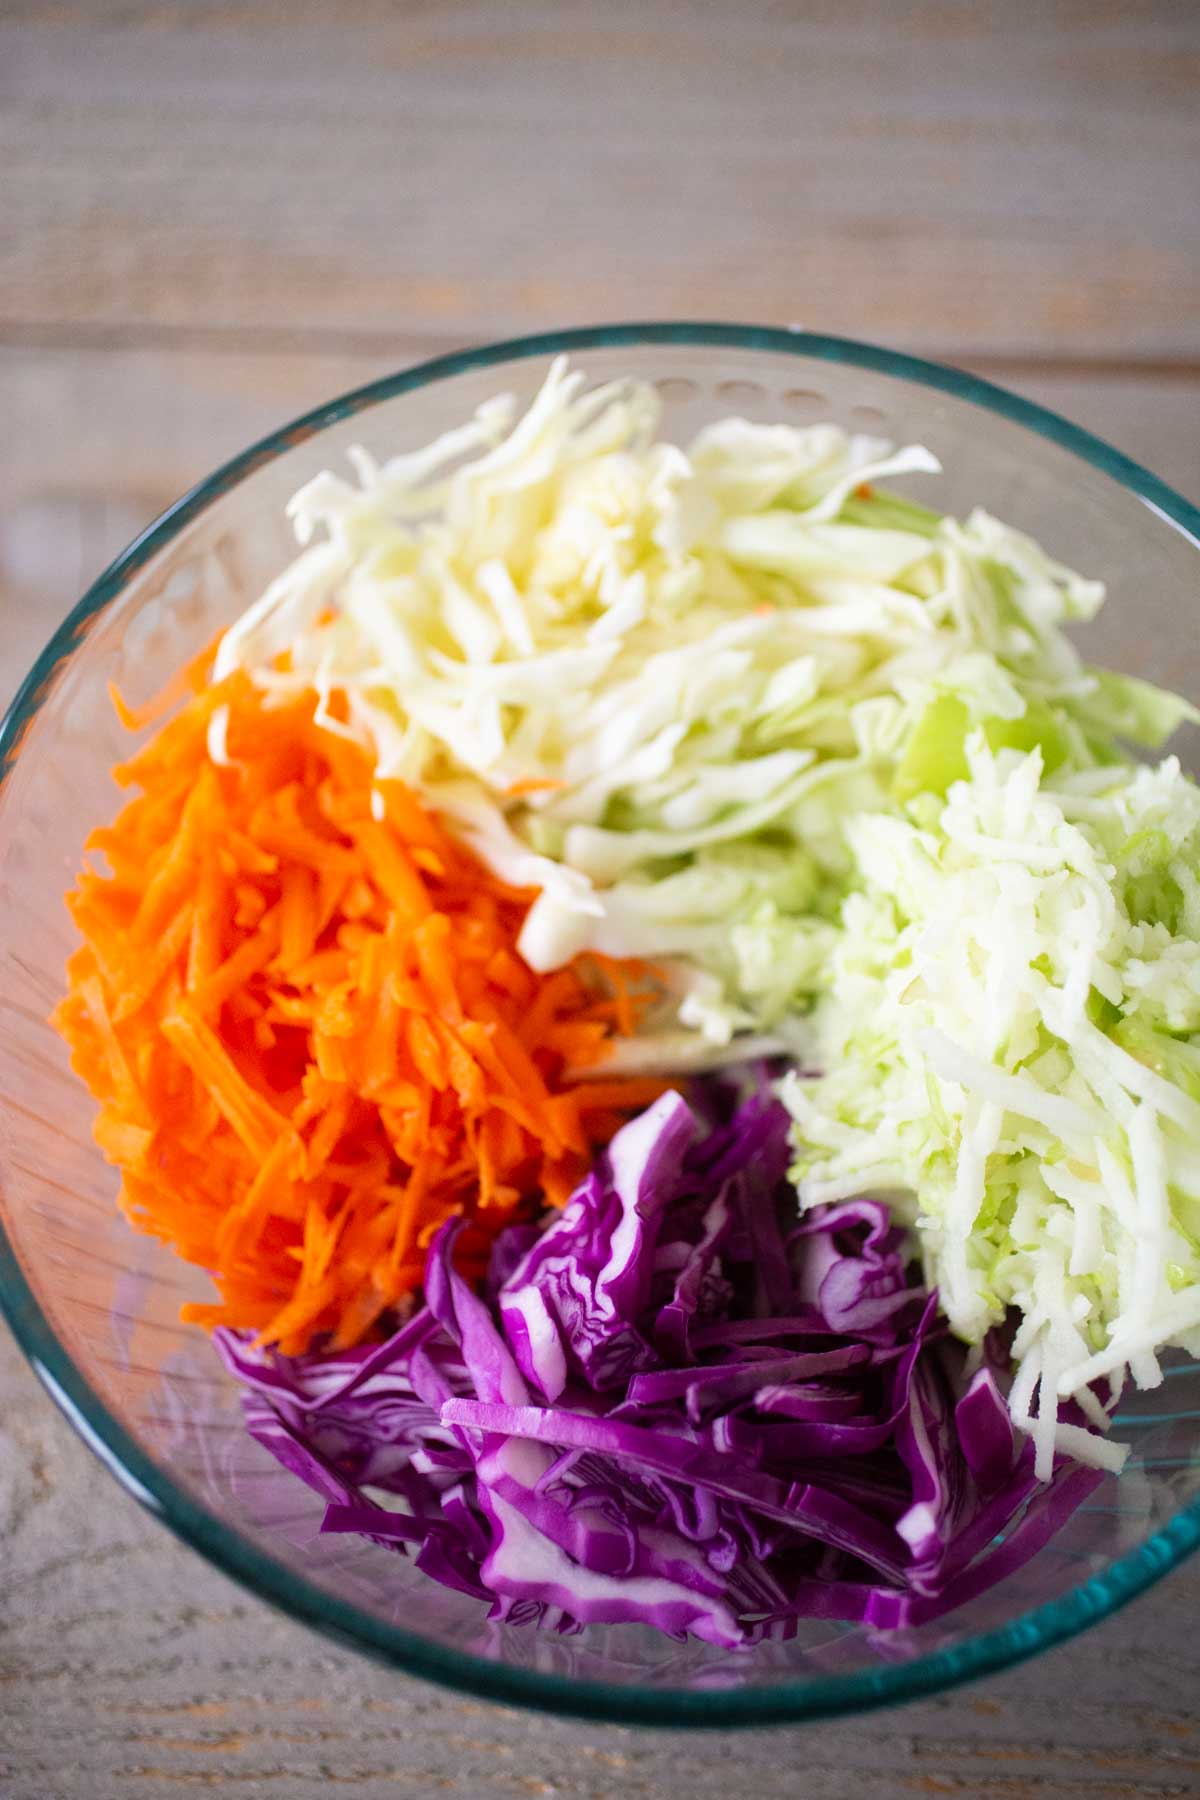 Shredded purple cabbage, shredded carrots, and shredded apples are ready to be made into slaw.